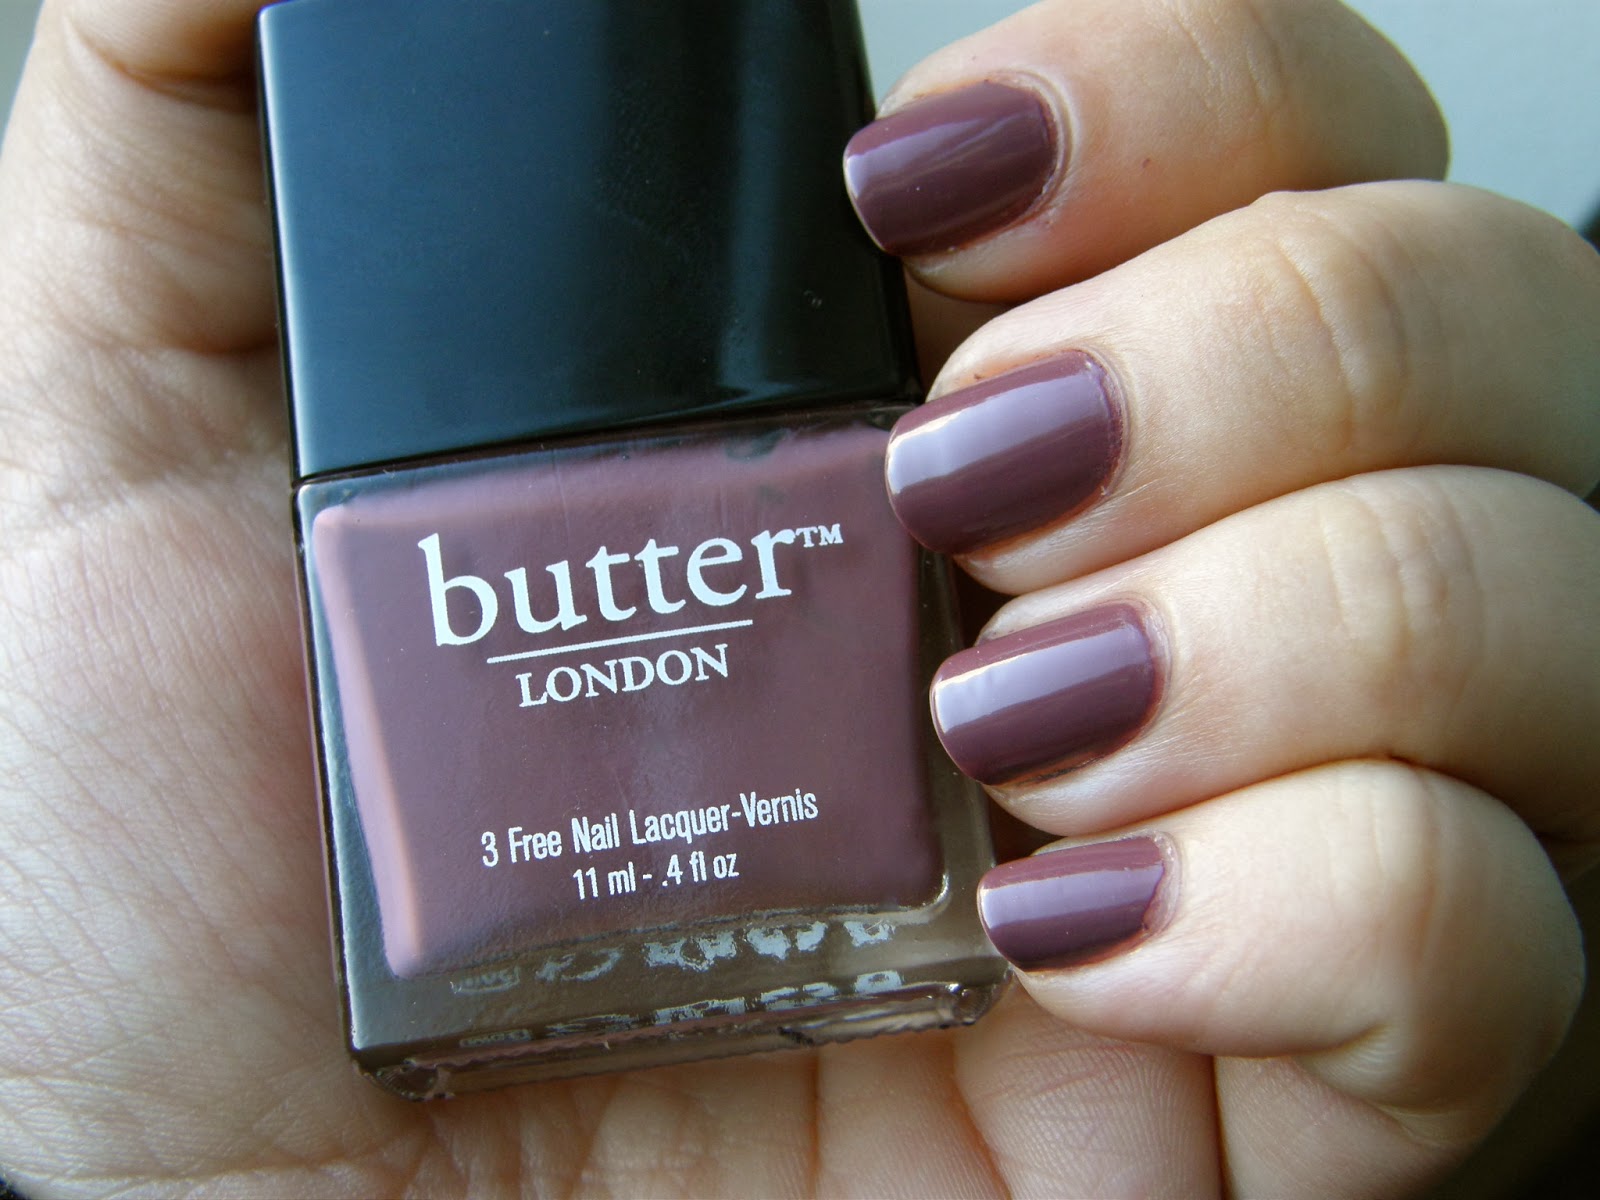 7. Butter London Patent Shine 10X in "Toff" - wide 3